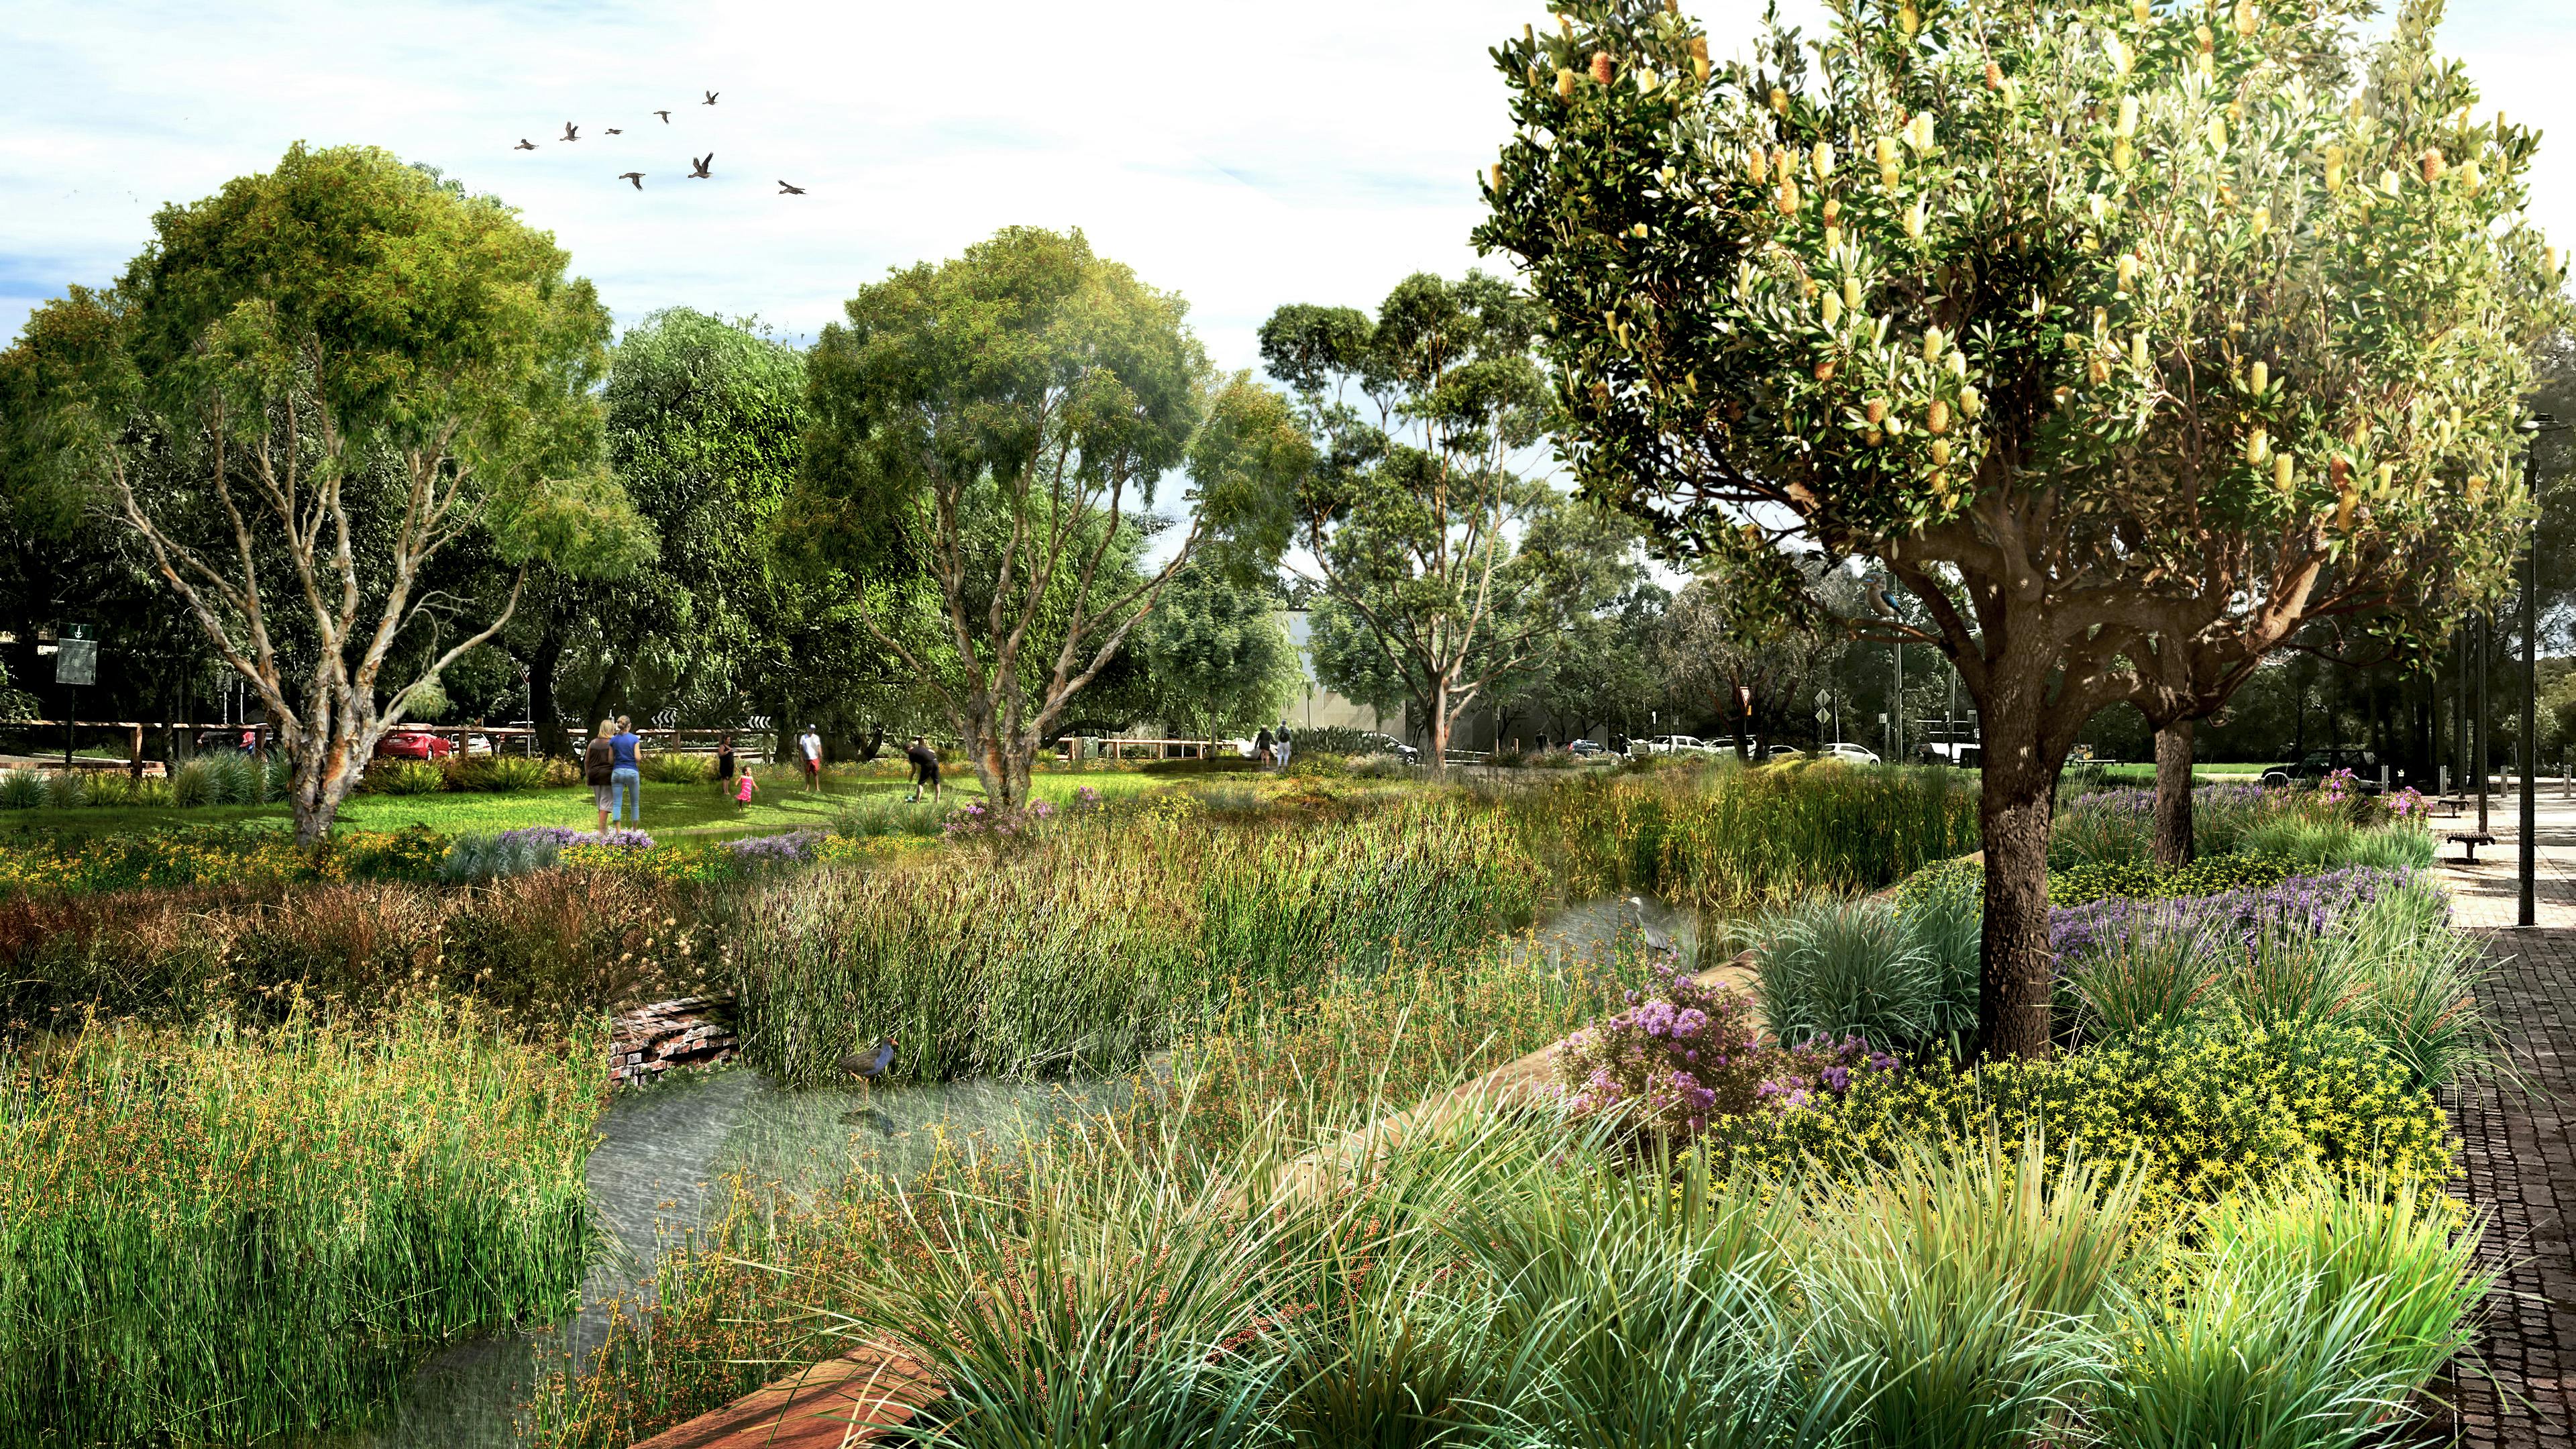 An artist's impression of Federal Park once the wetland has been created.